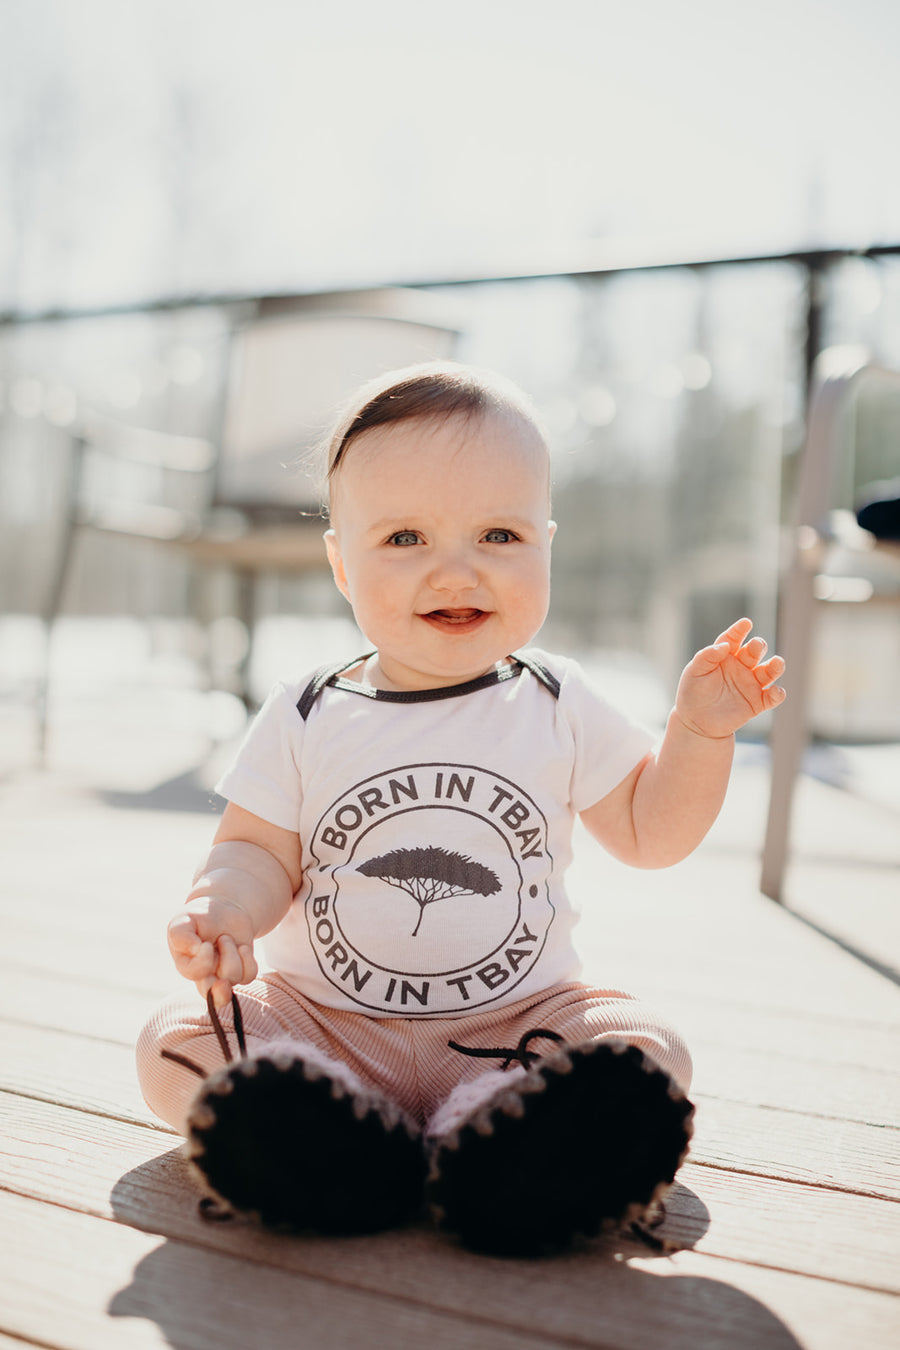 Organic baby onesie in white with grey "Born in Tbay" logo on front